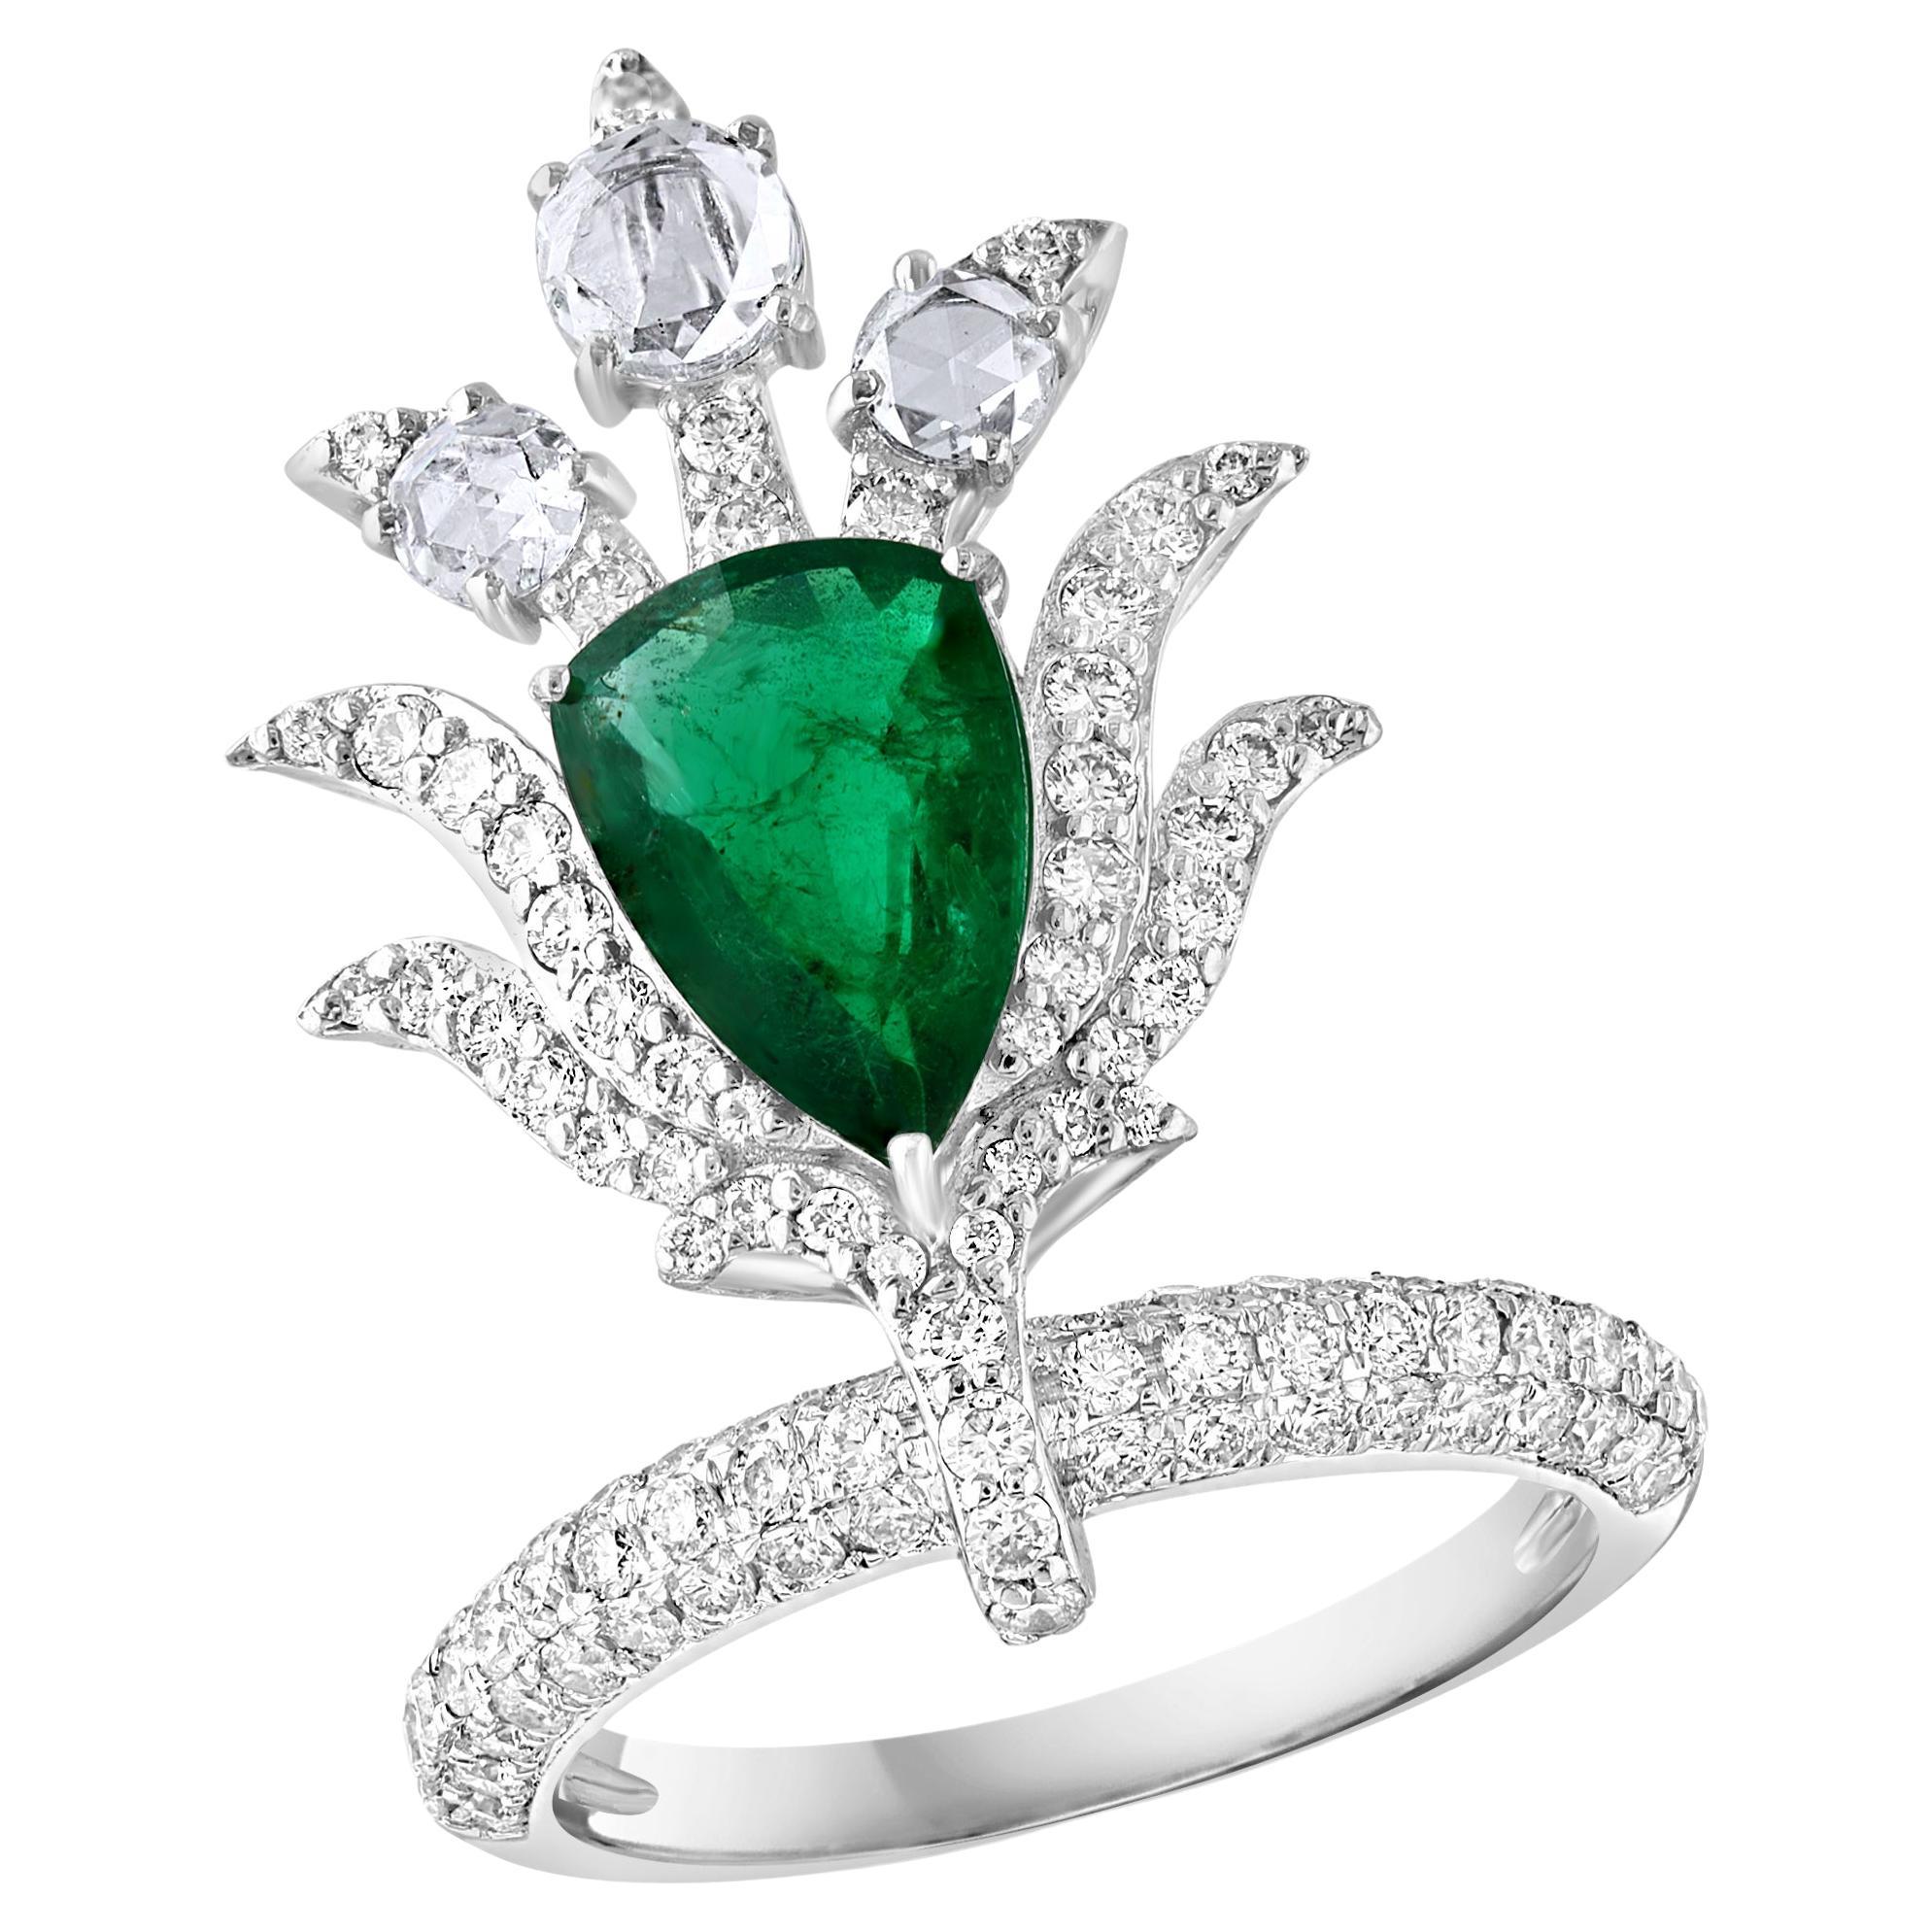 2 Ct Finest Zambian Pear Emerald & 2 Ct Diamond Ring in 18 Kt Gold Size 7